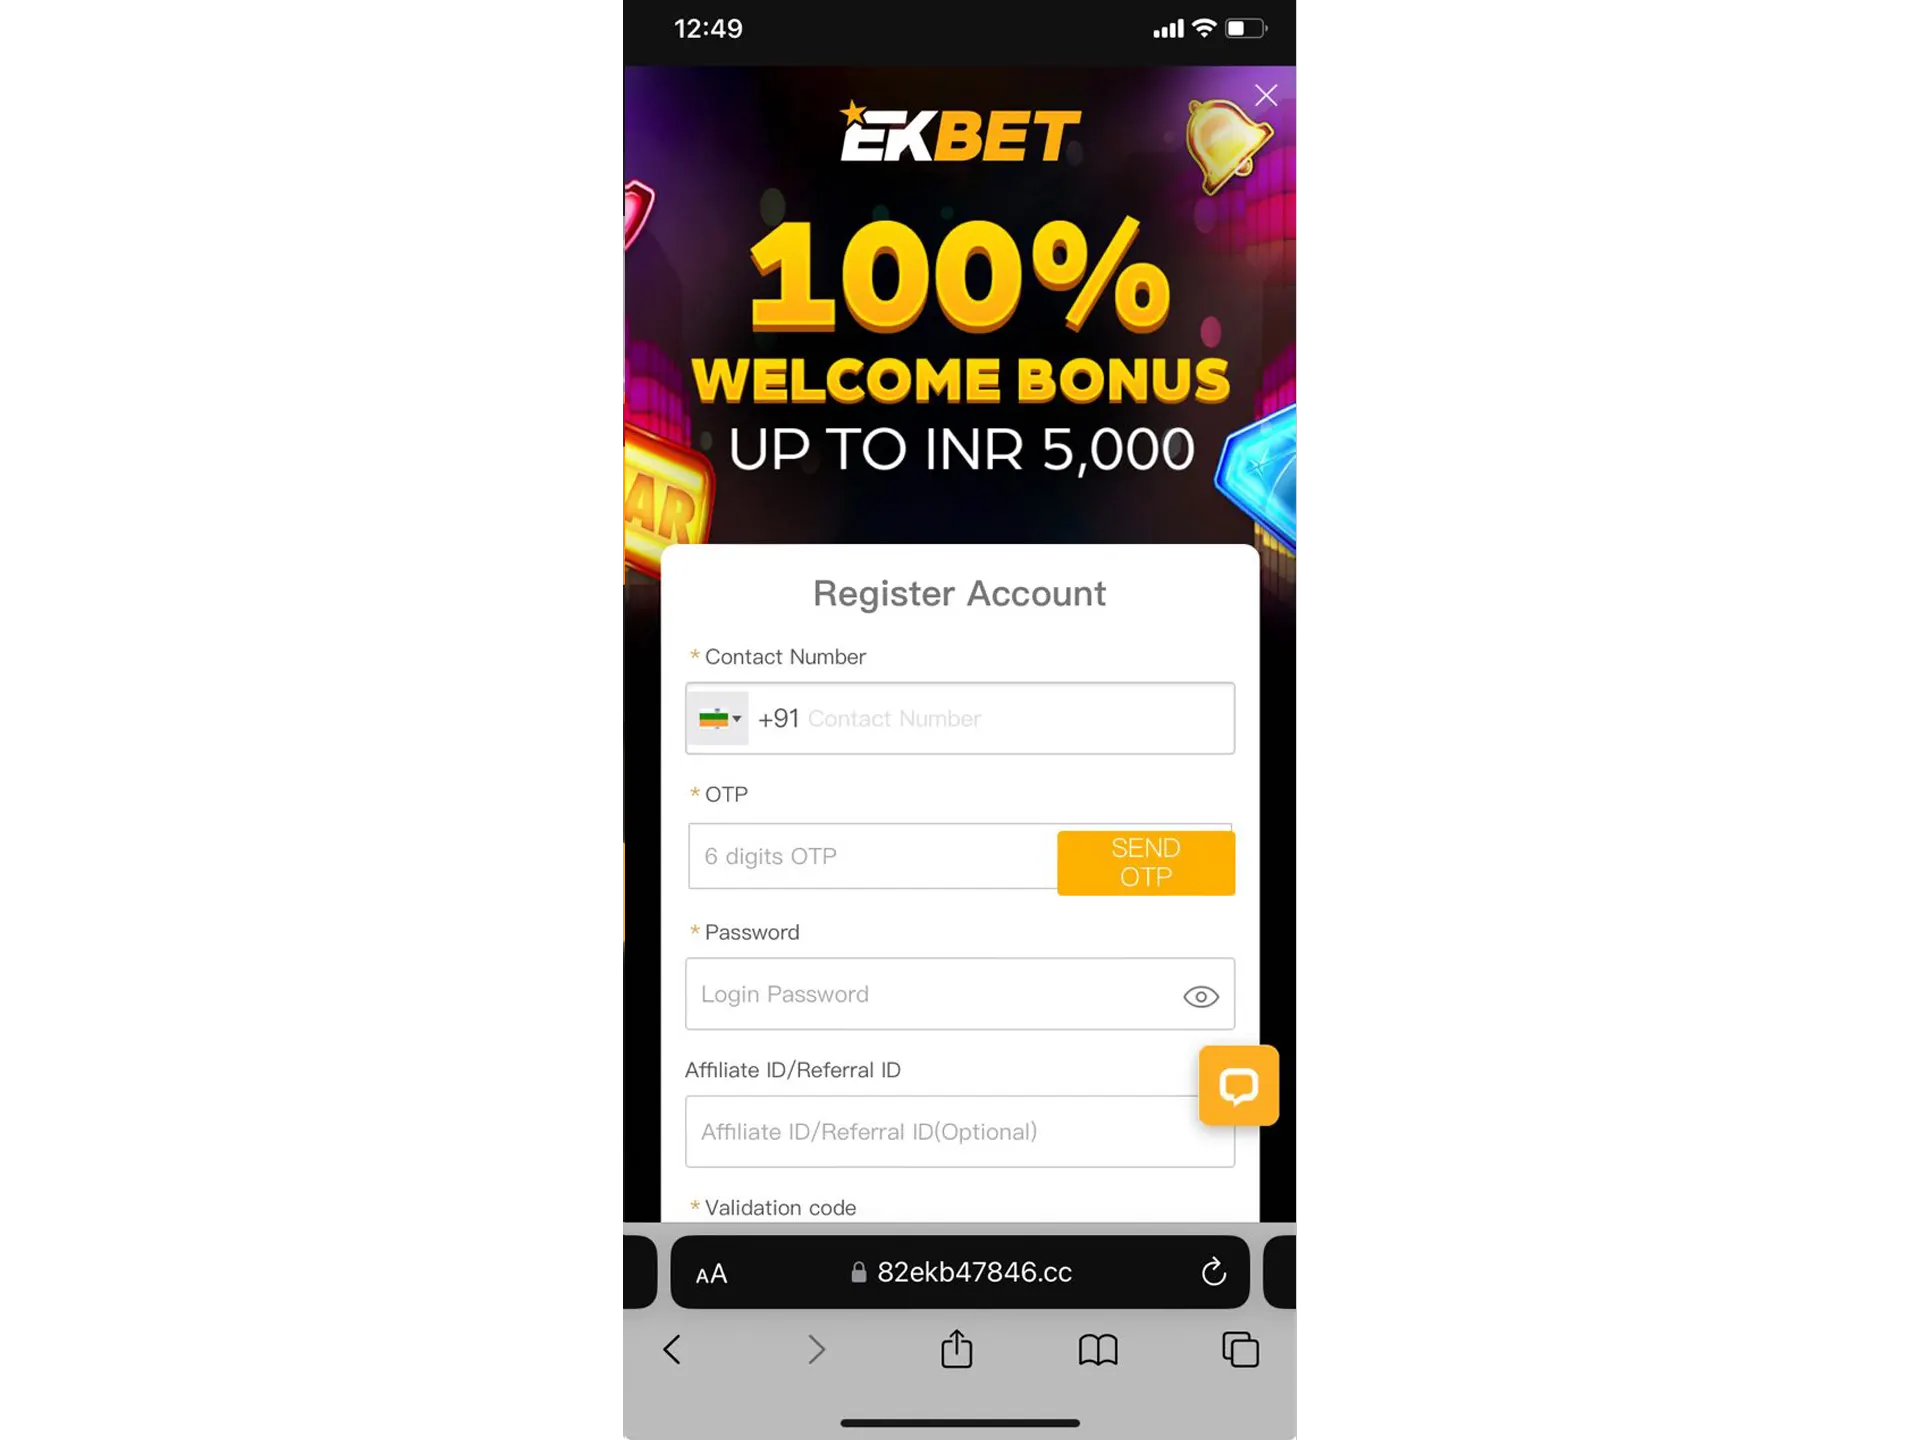 Sign up for EKbet using your mobile device.